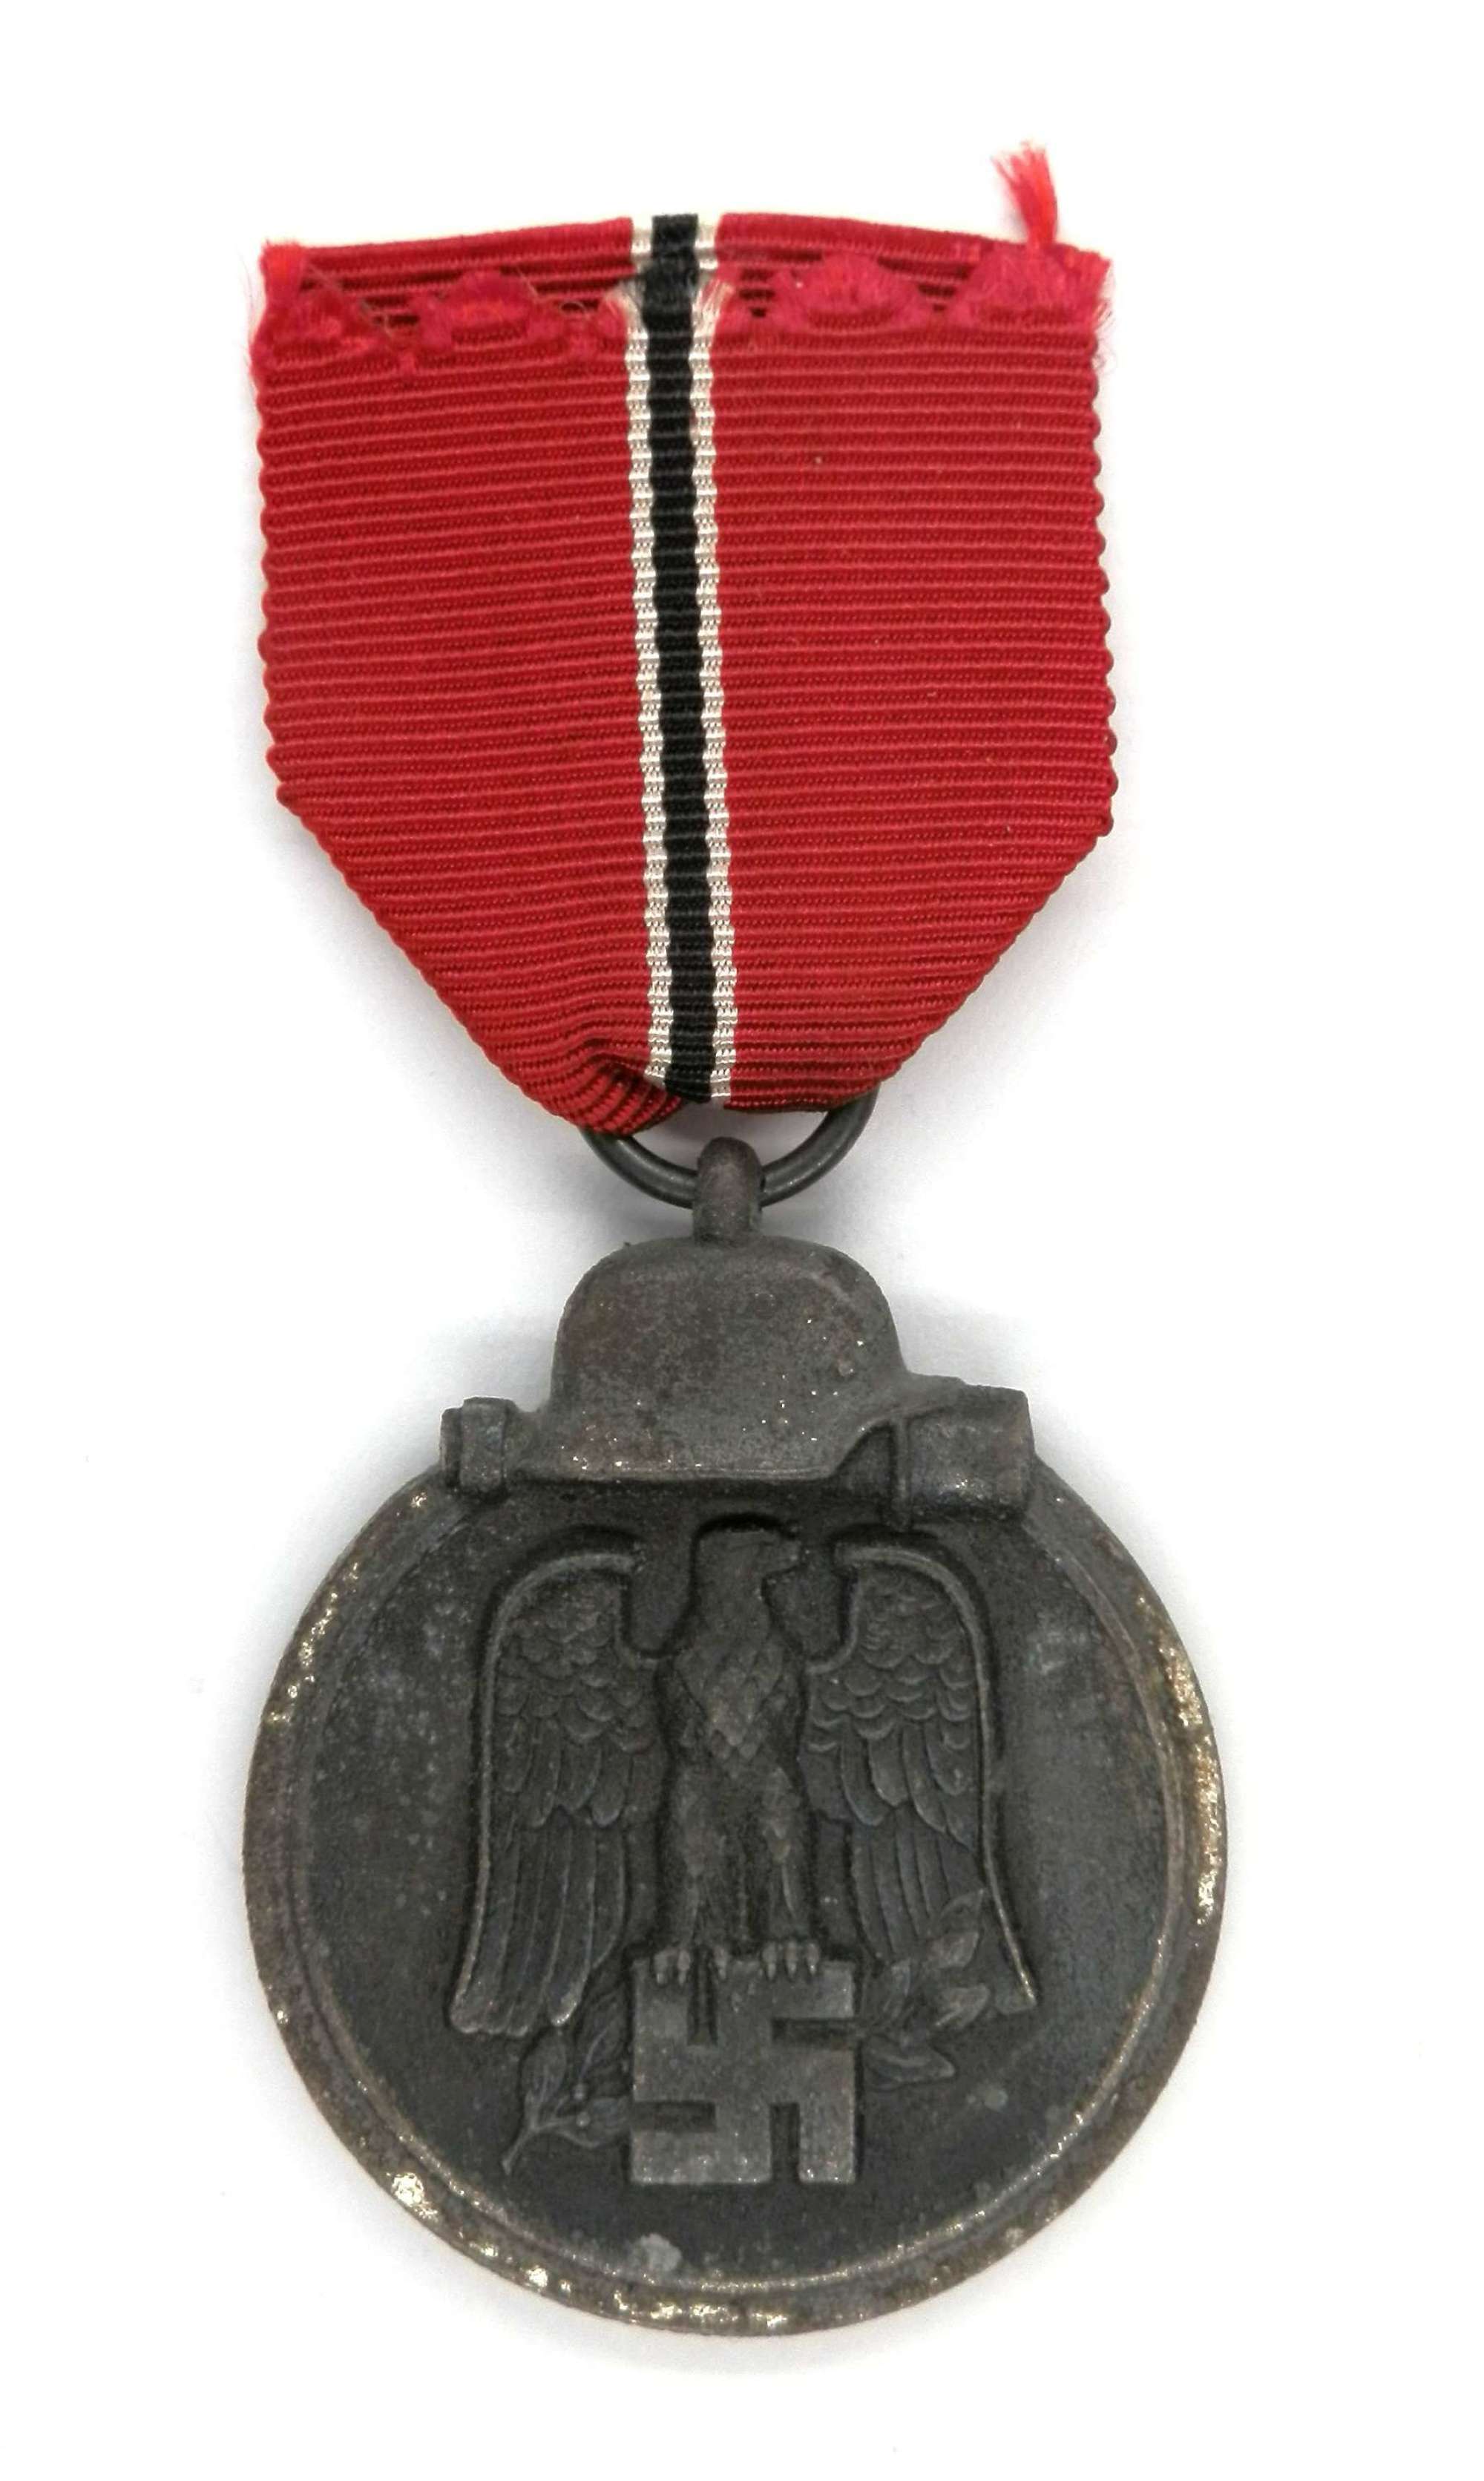 Winter Campaign Medal Russia 1941-42. (Eastern Front Medal) Marked 25.